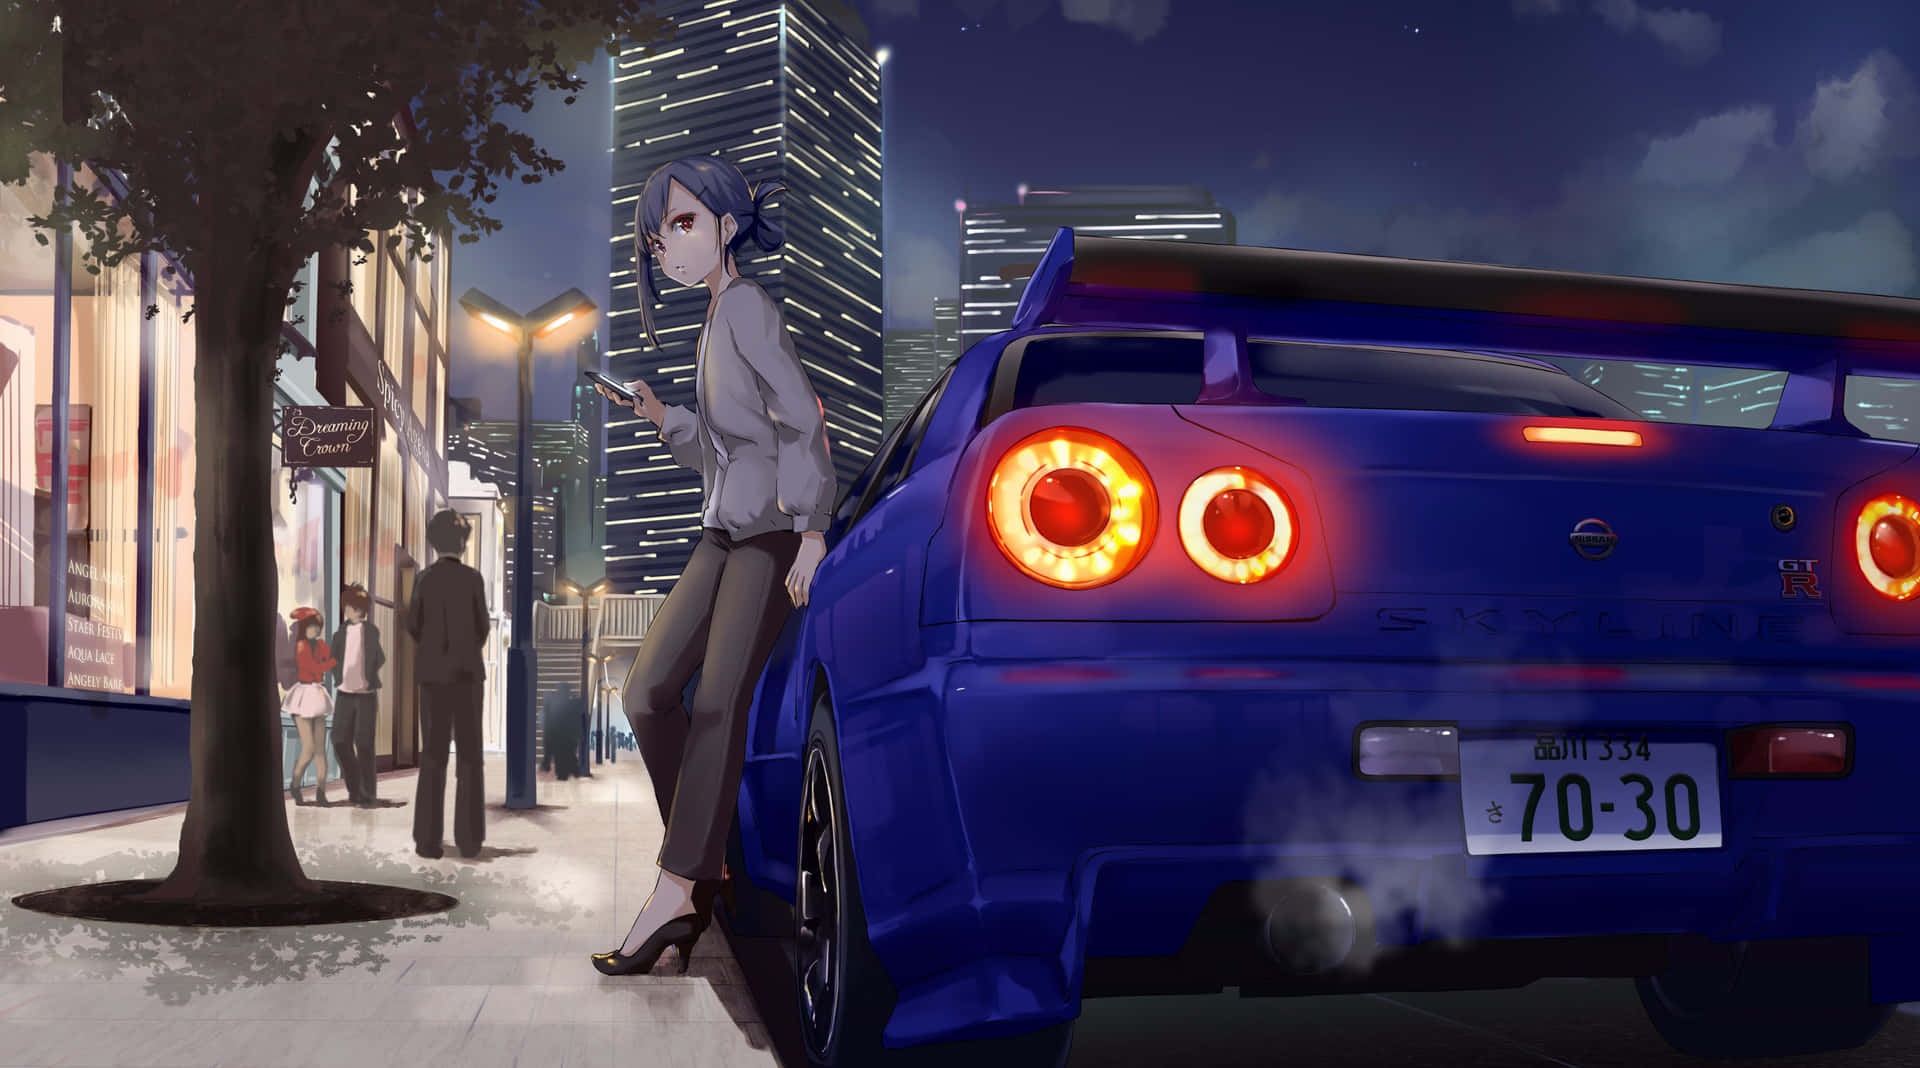 Enjoy the Ride in this Neon-Lit Anime Car